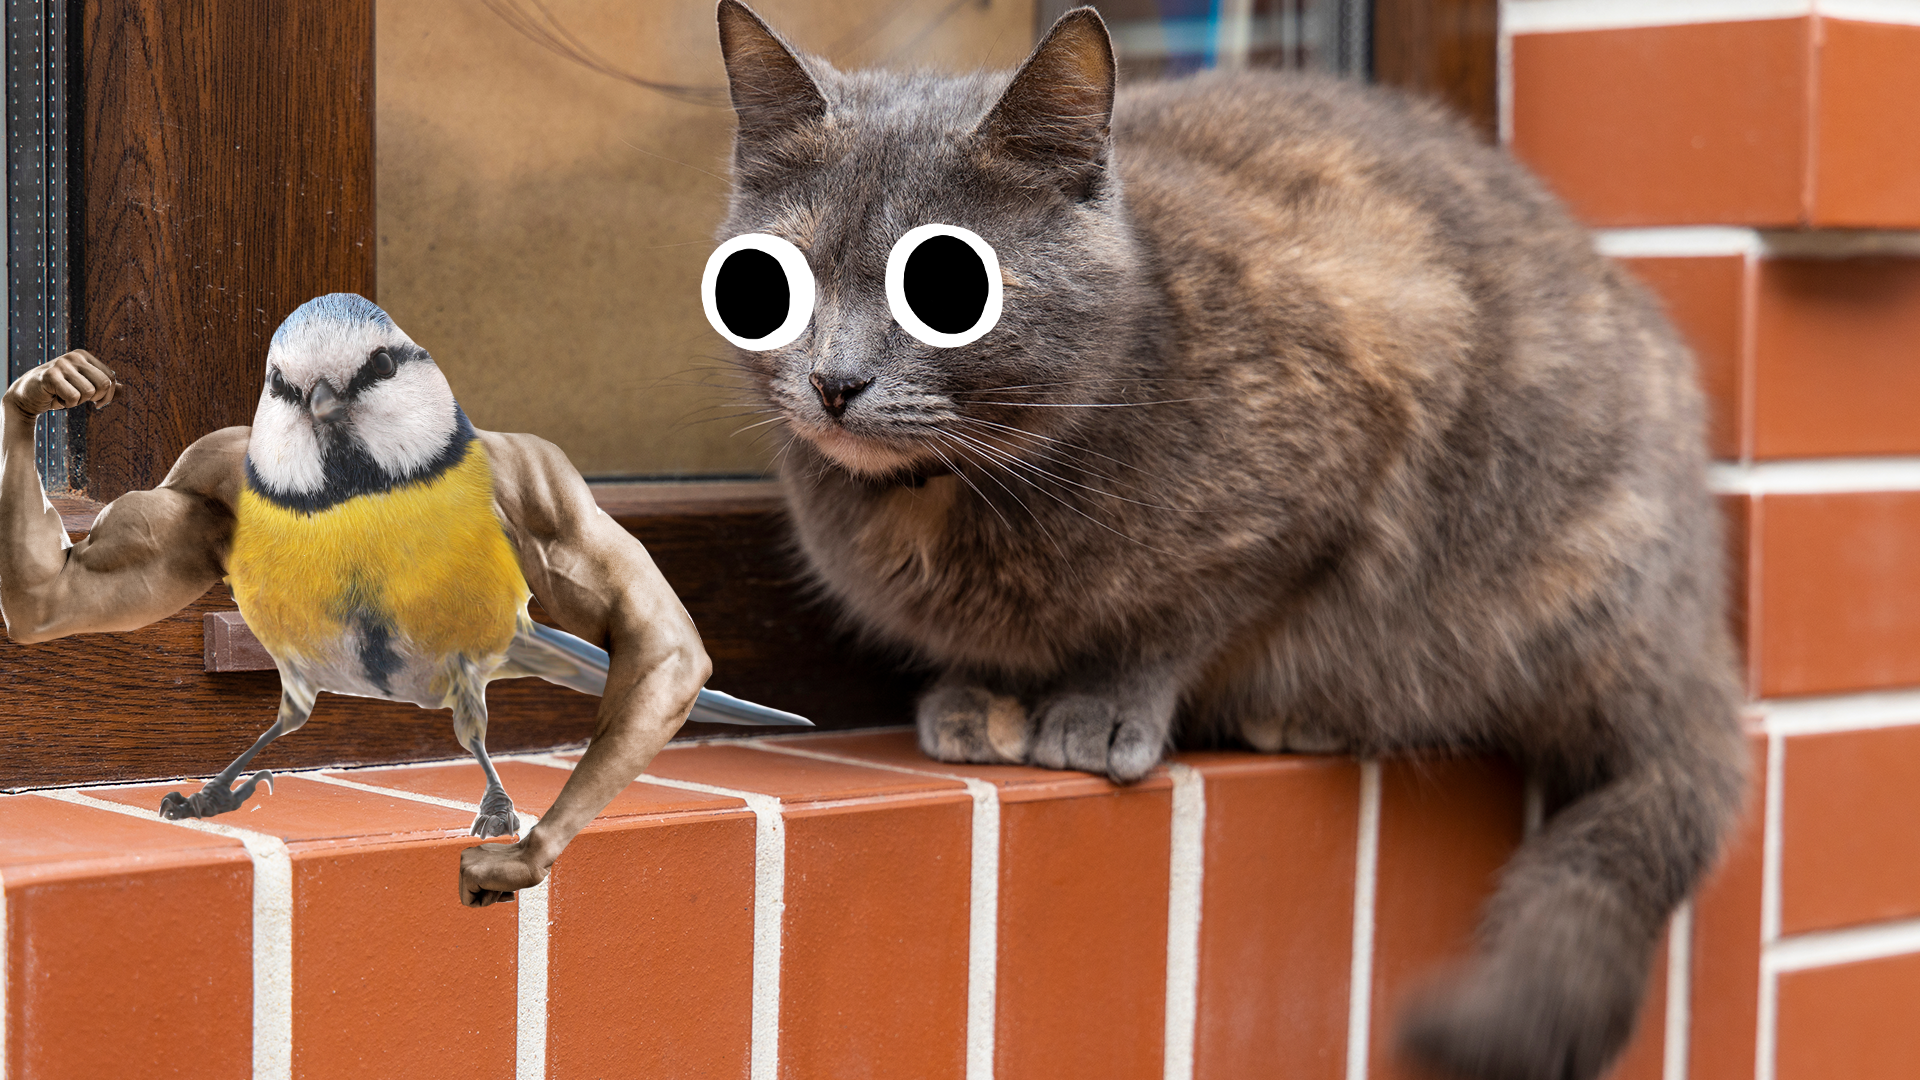 A cat and a muscular bird sit on a wall